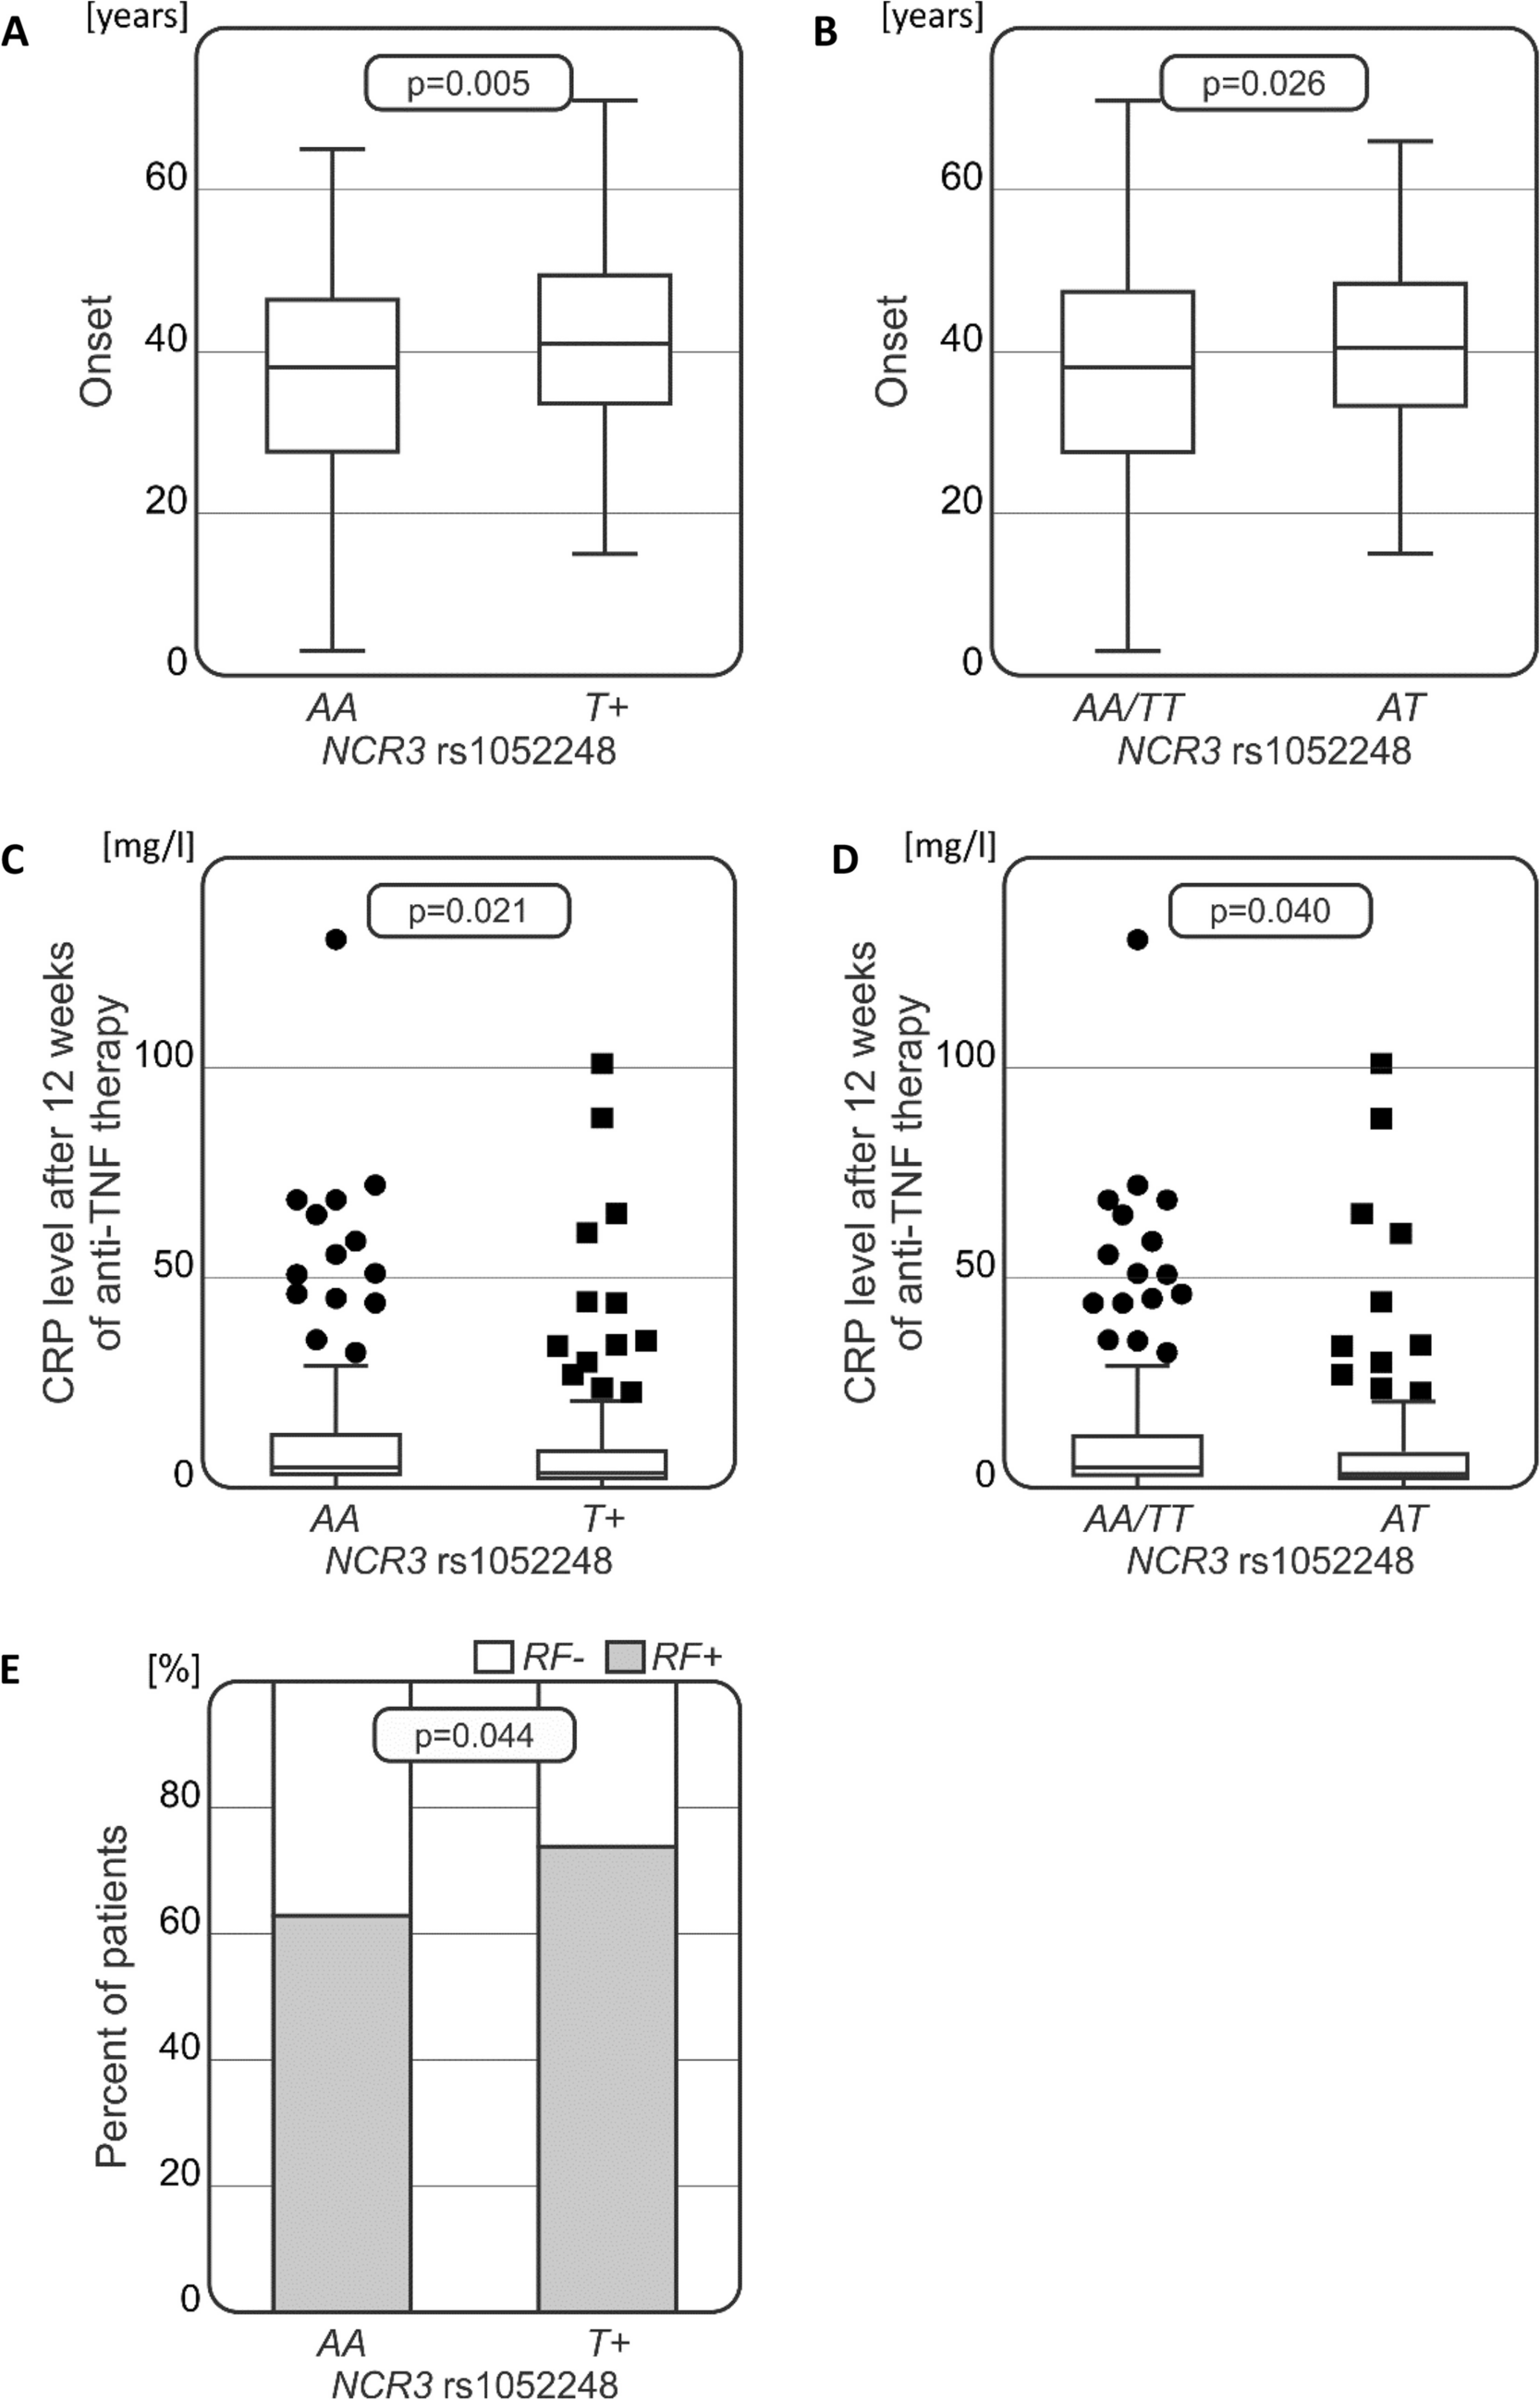 Genetic variability of three common NK and γδ T cell receptor genes (FCγ3R, NCR3, and DNAM-1) and their role in Polish patients with rheumatoid arthritis and ankylosing spondylitis